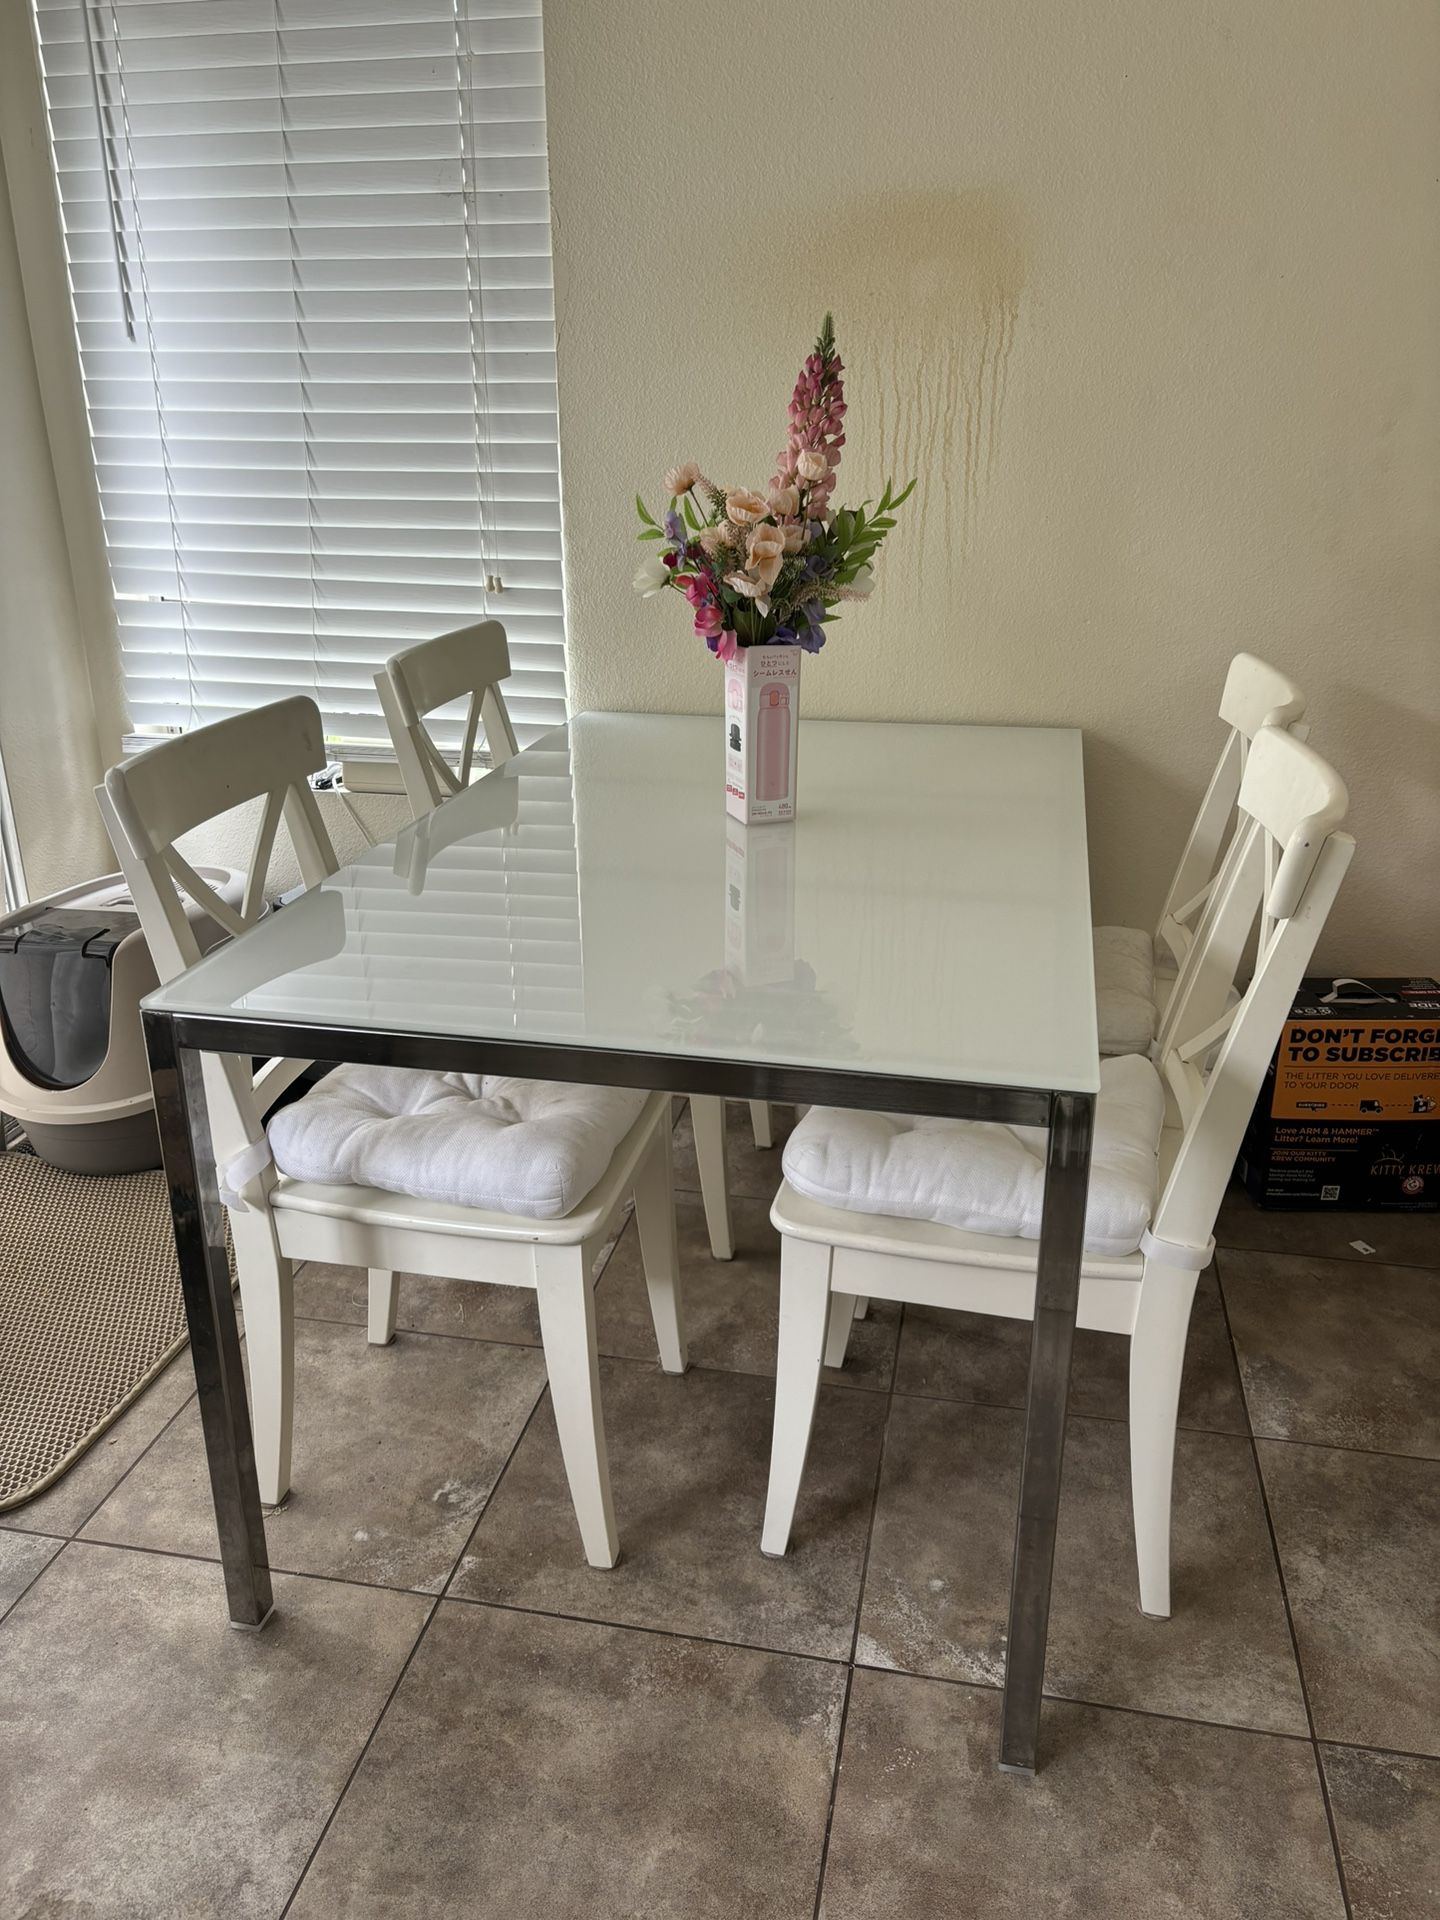 Ikea Torsby Kitchen Dining Table 